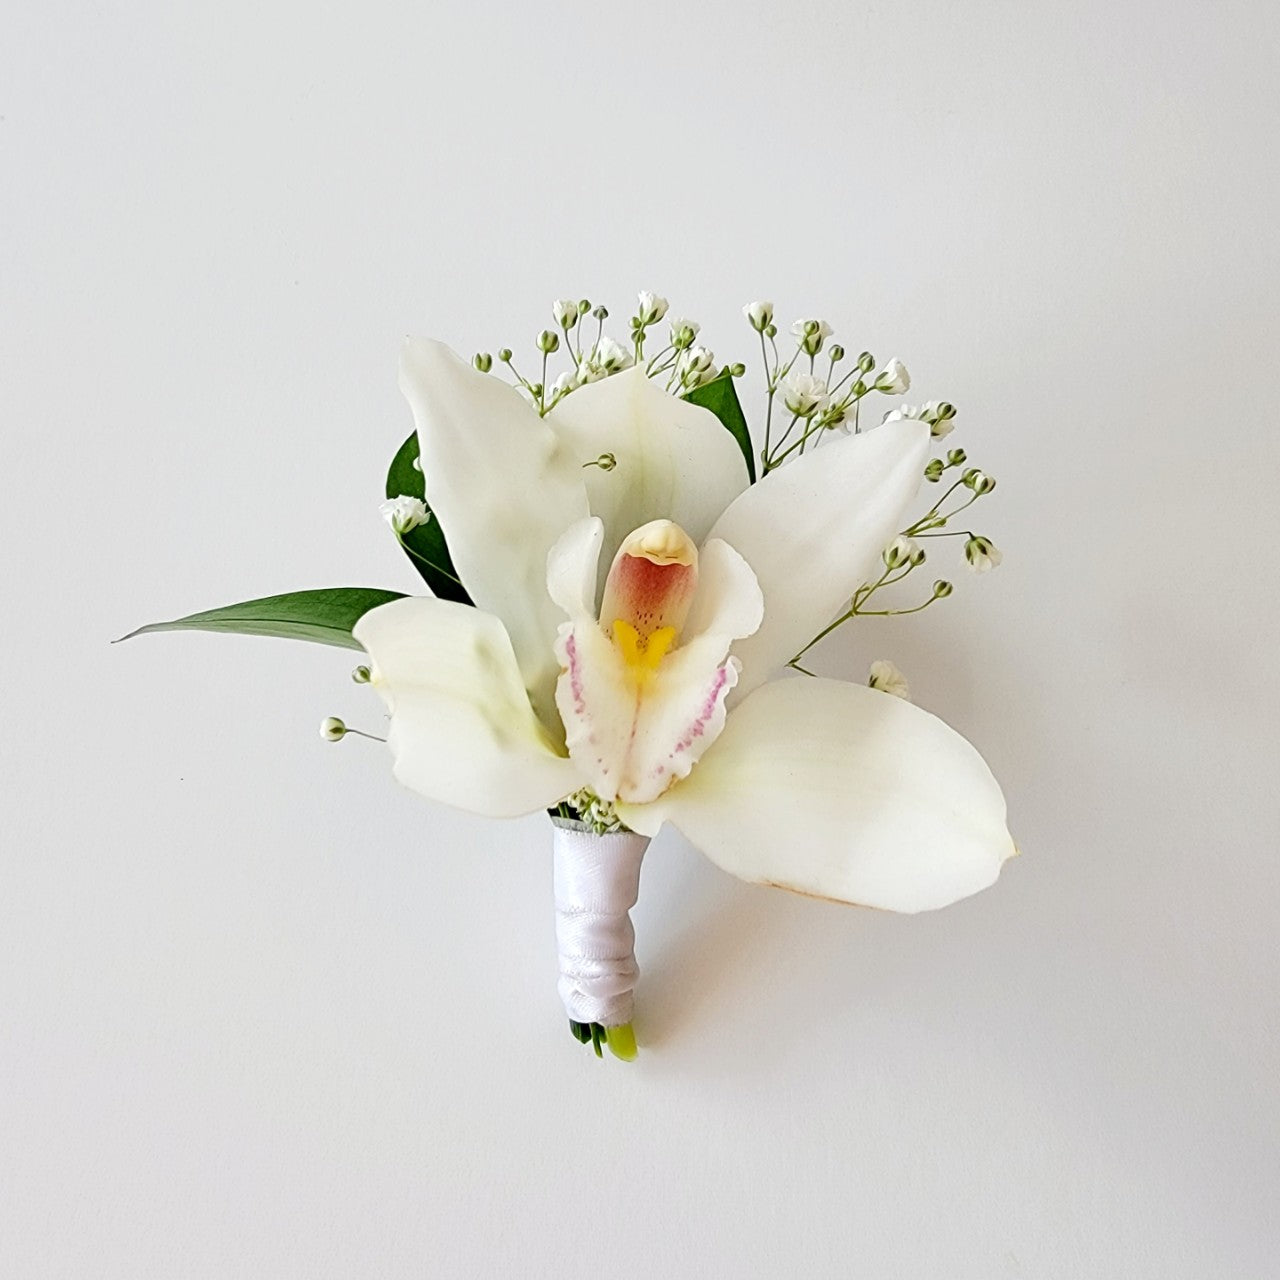 white orchid corsage boutonniere